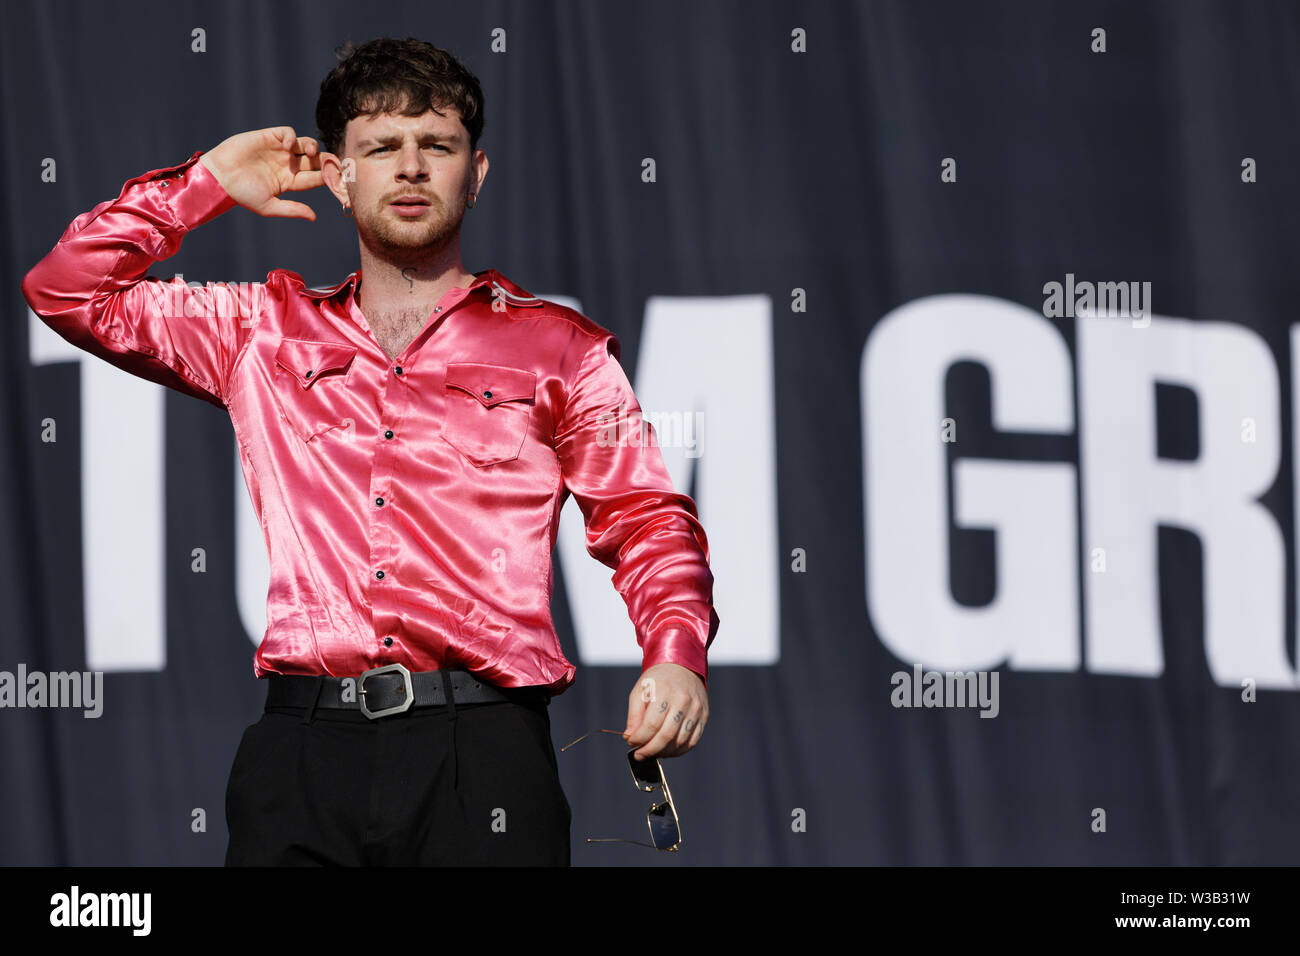 Swansea, UK. 13th July, 2019. Tom Grennan performs on stage. Re: Stereophonics live concert at the Singleton Park in Swansea, Wales, UK. Credit: ATHENA PICTURE AGENCY LTD/Alamy Live News Stock Photo